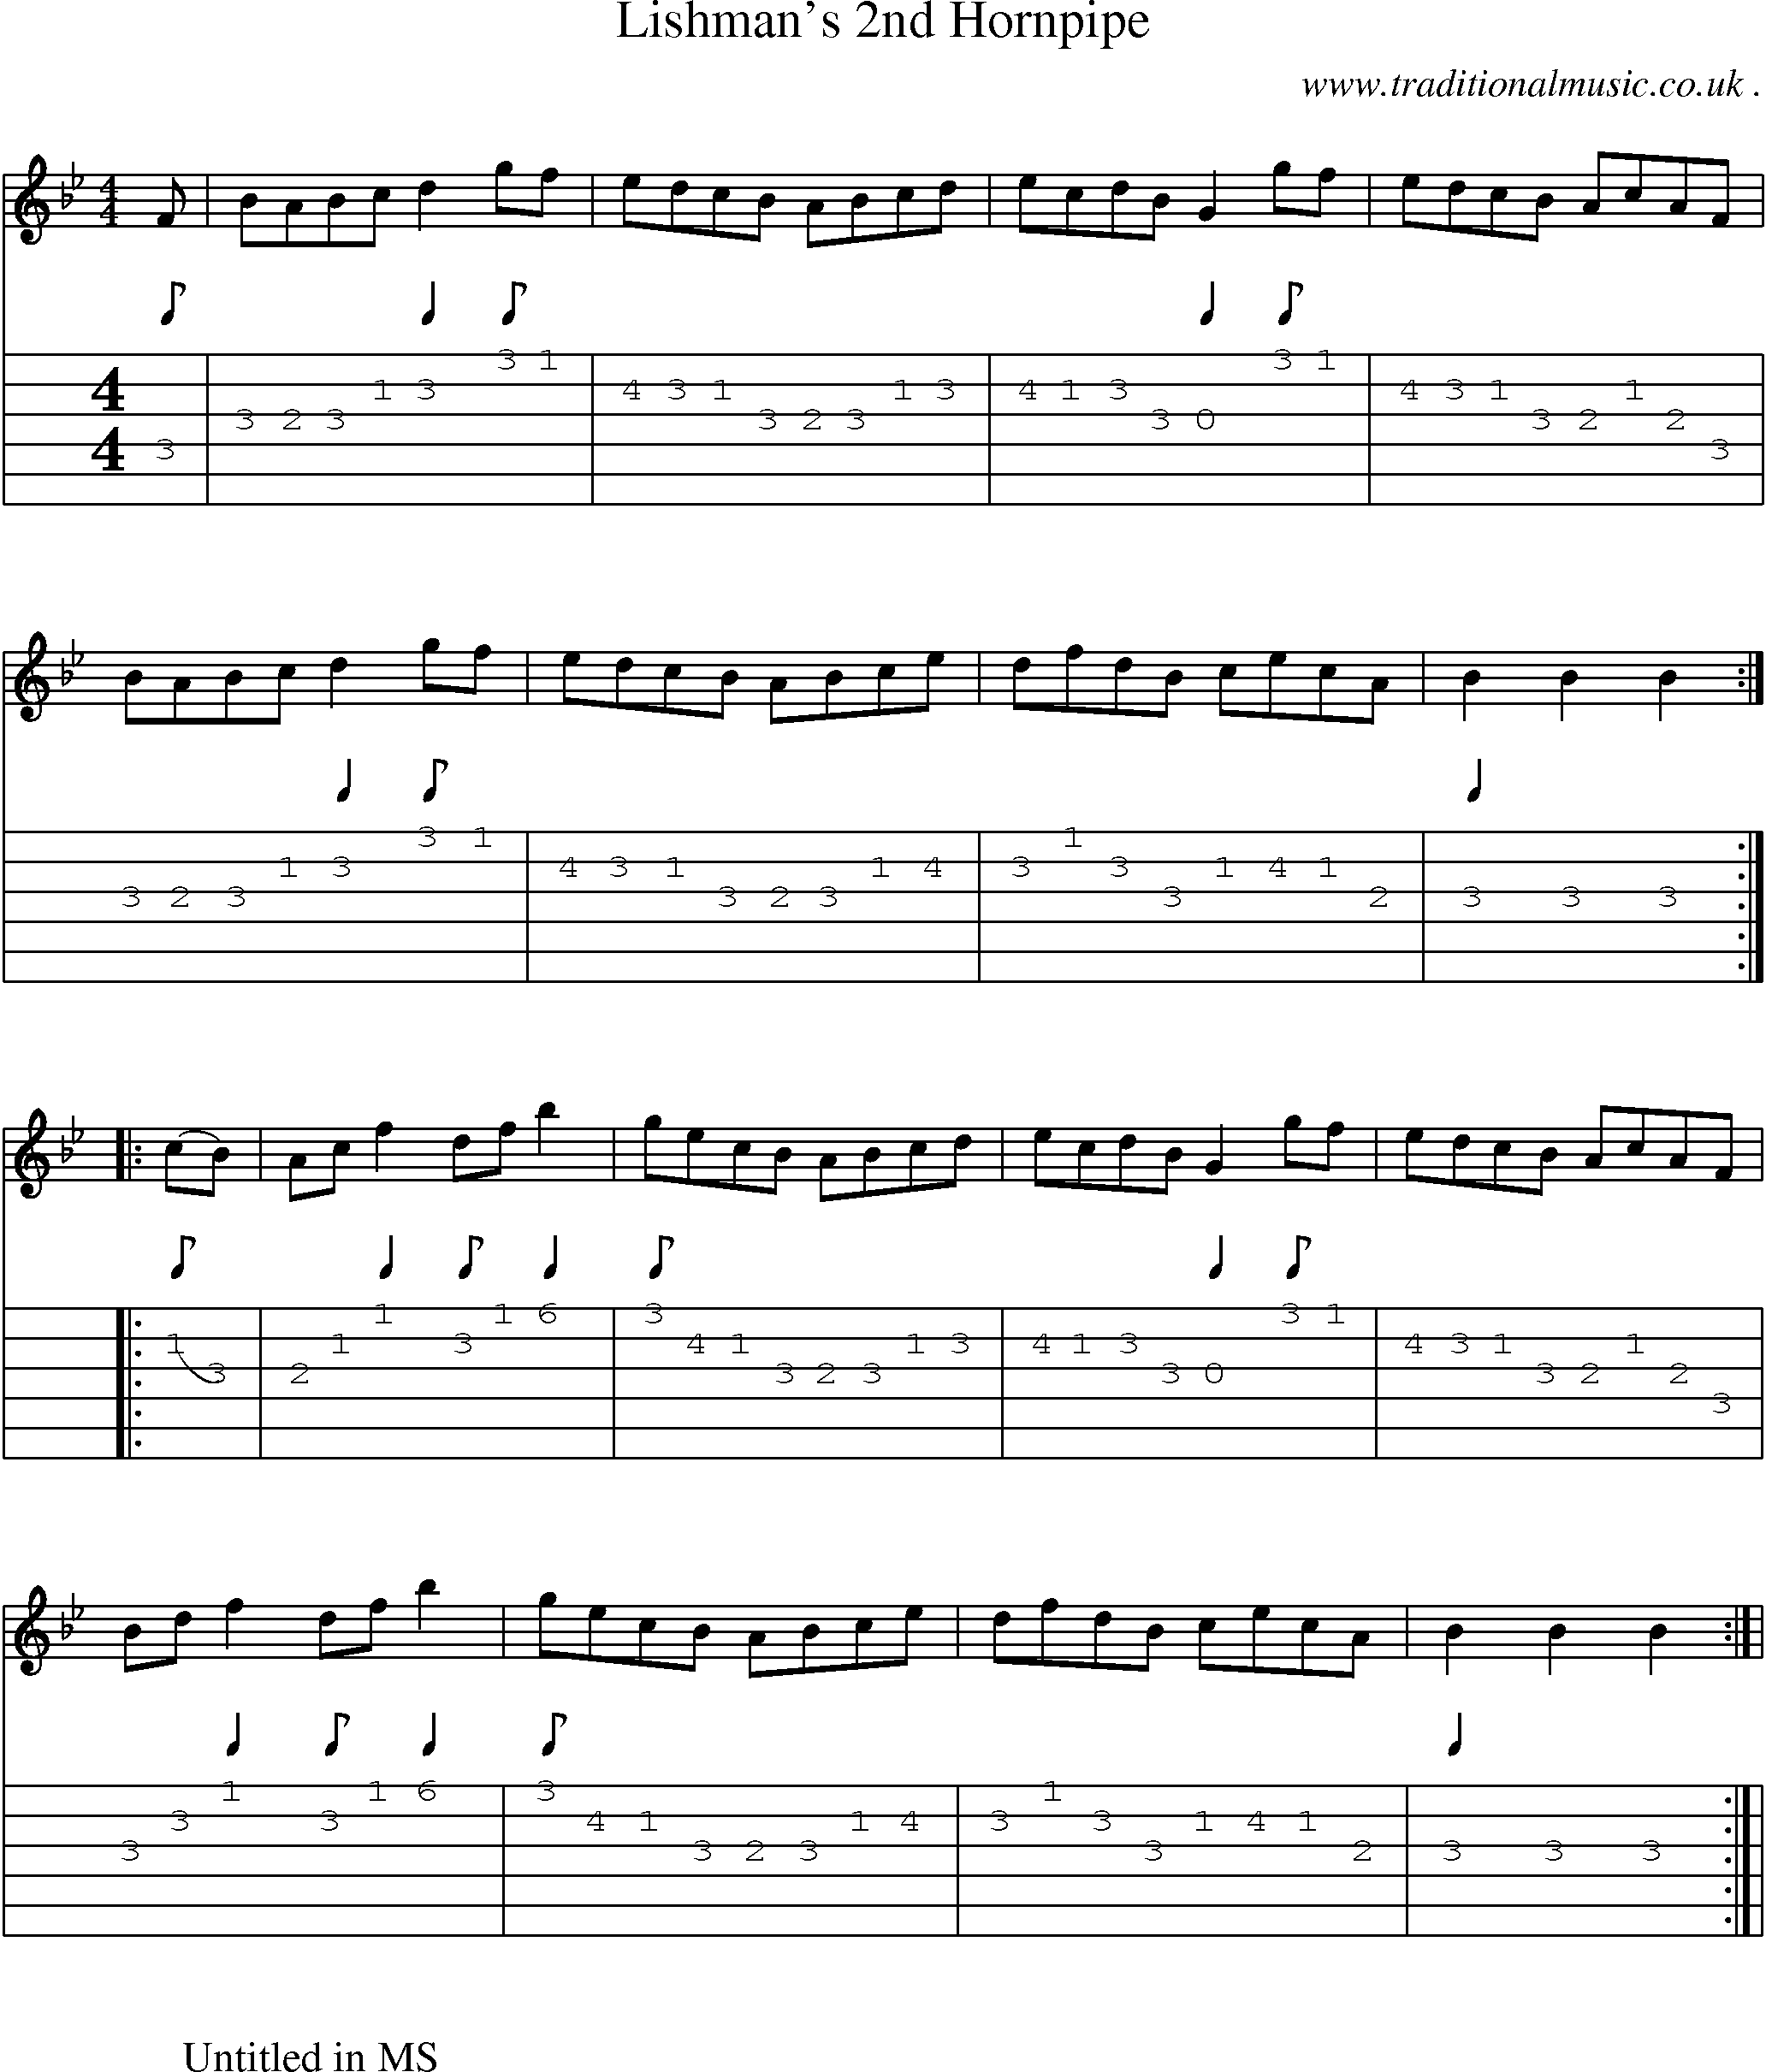 Sheet-Music and Guitar Tabs for Lishmans 2nd Hornpipe